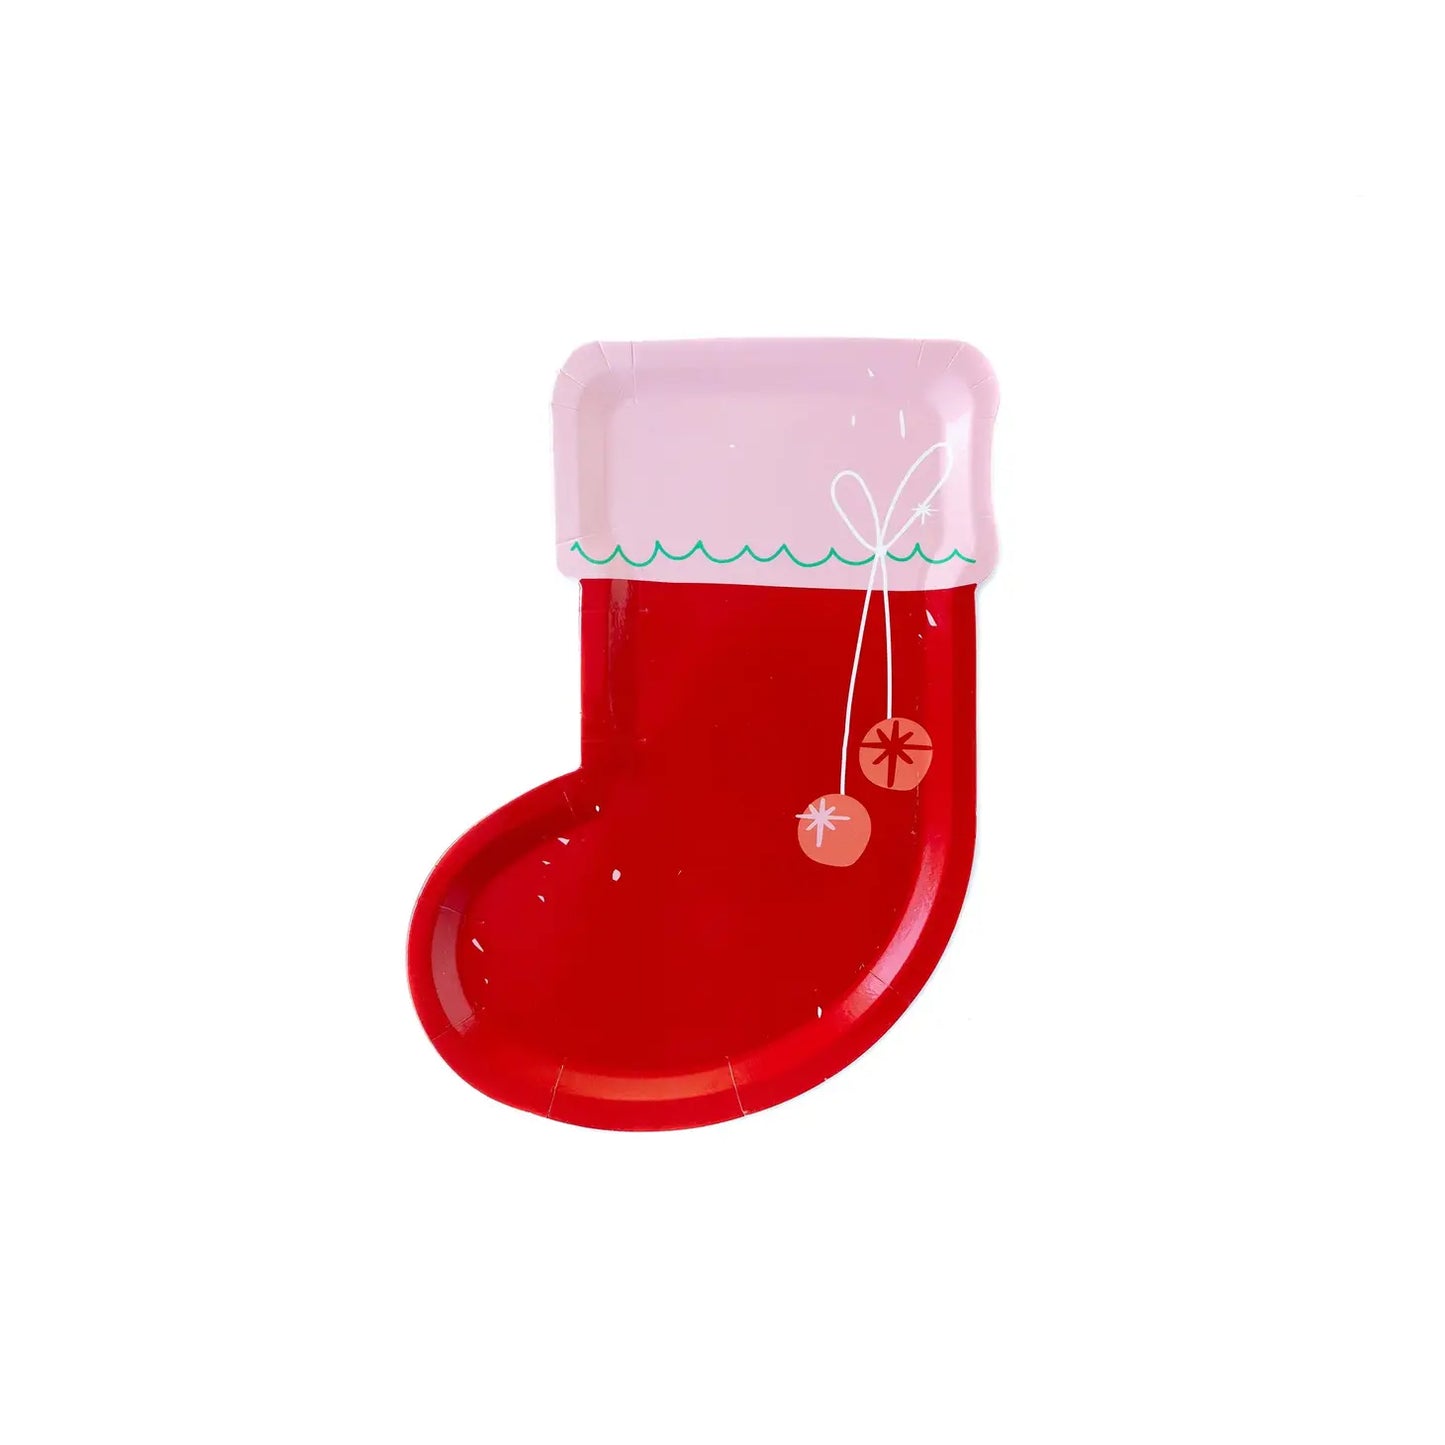 Oui Party Christmas 9" Shaped Stocking Plate